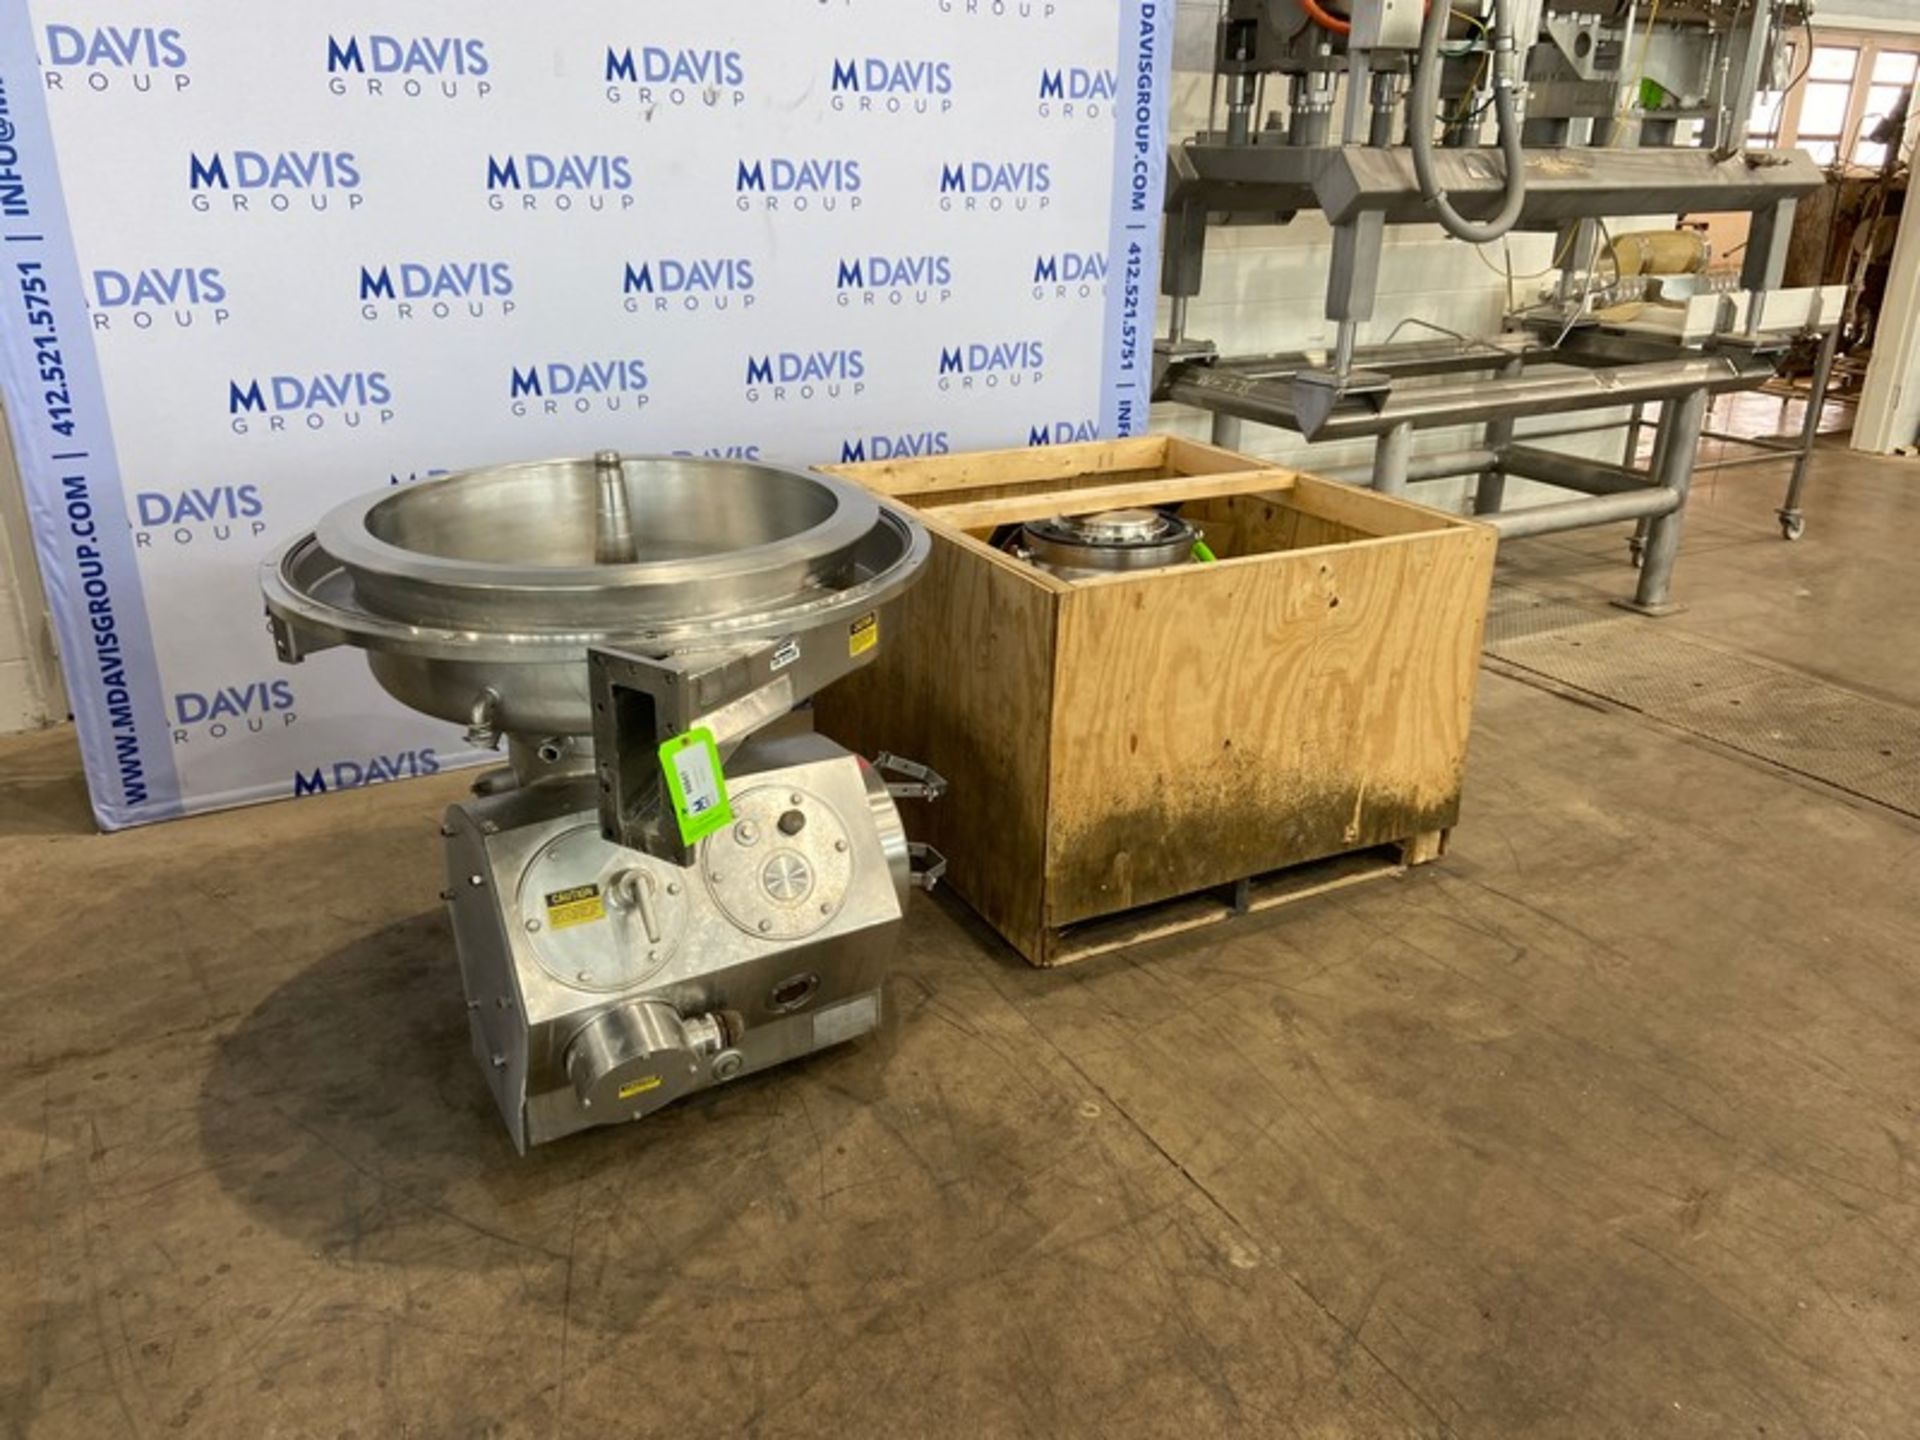 Separator Inc. S/S Separator,M/N MRPX4179IV316, S/N 2991595, Bowl RPM 3960(INV#88847) (Located @ the